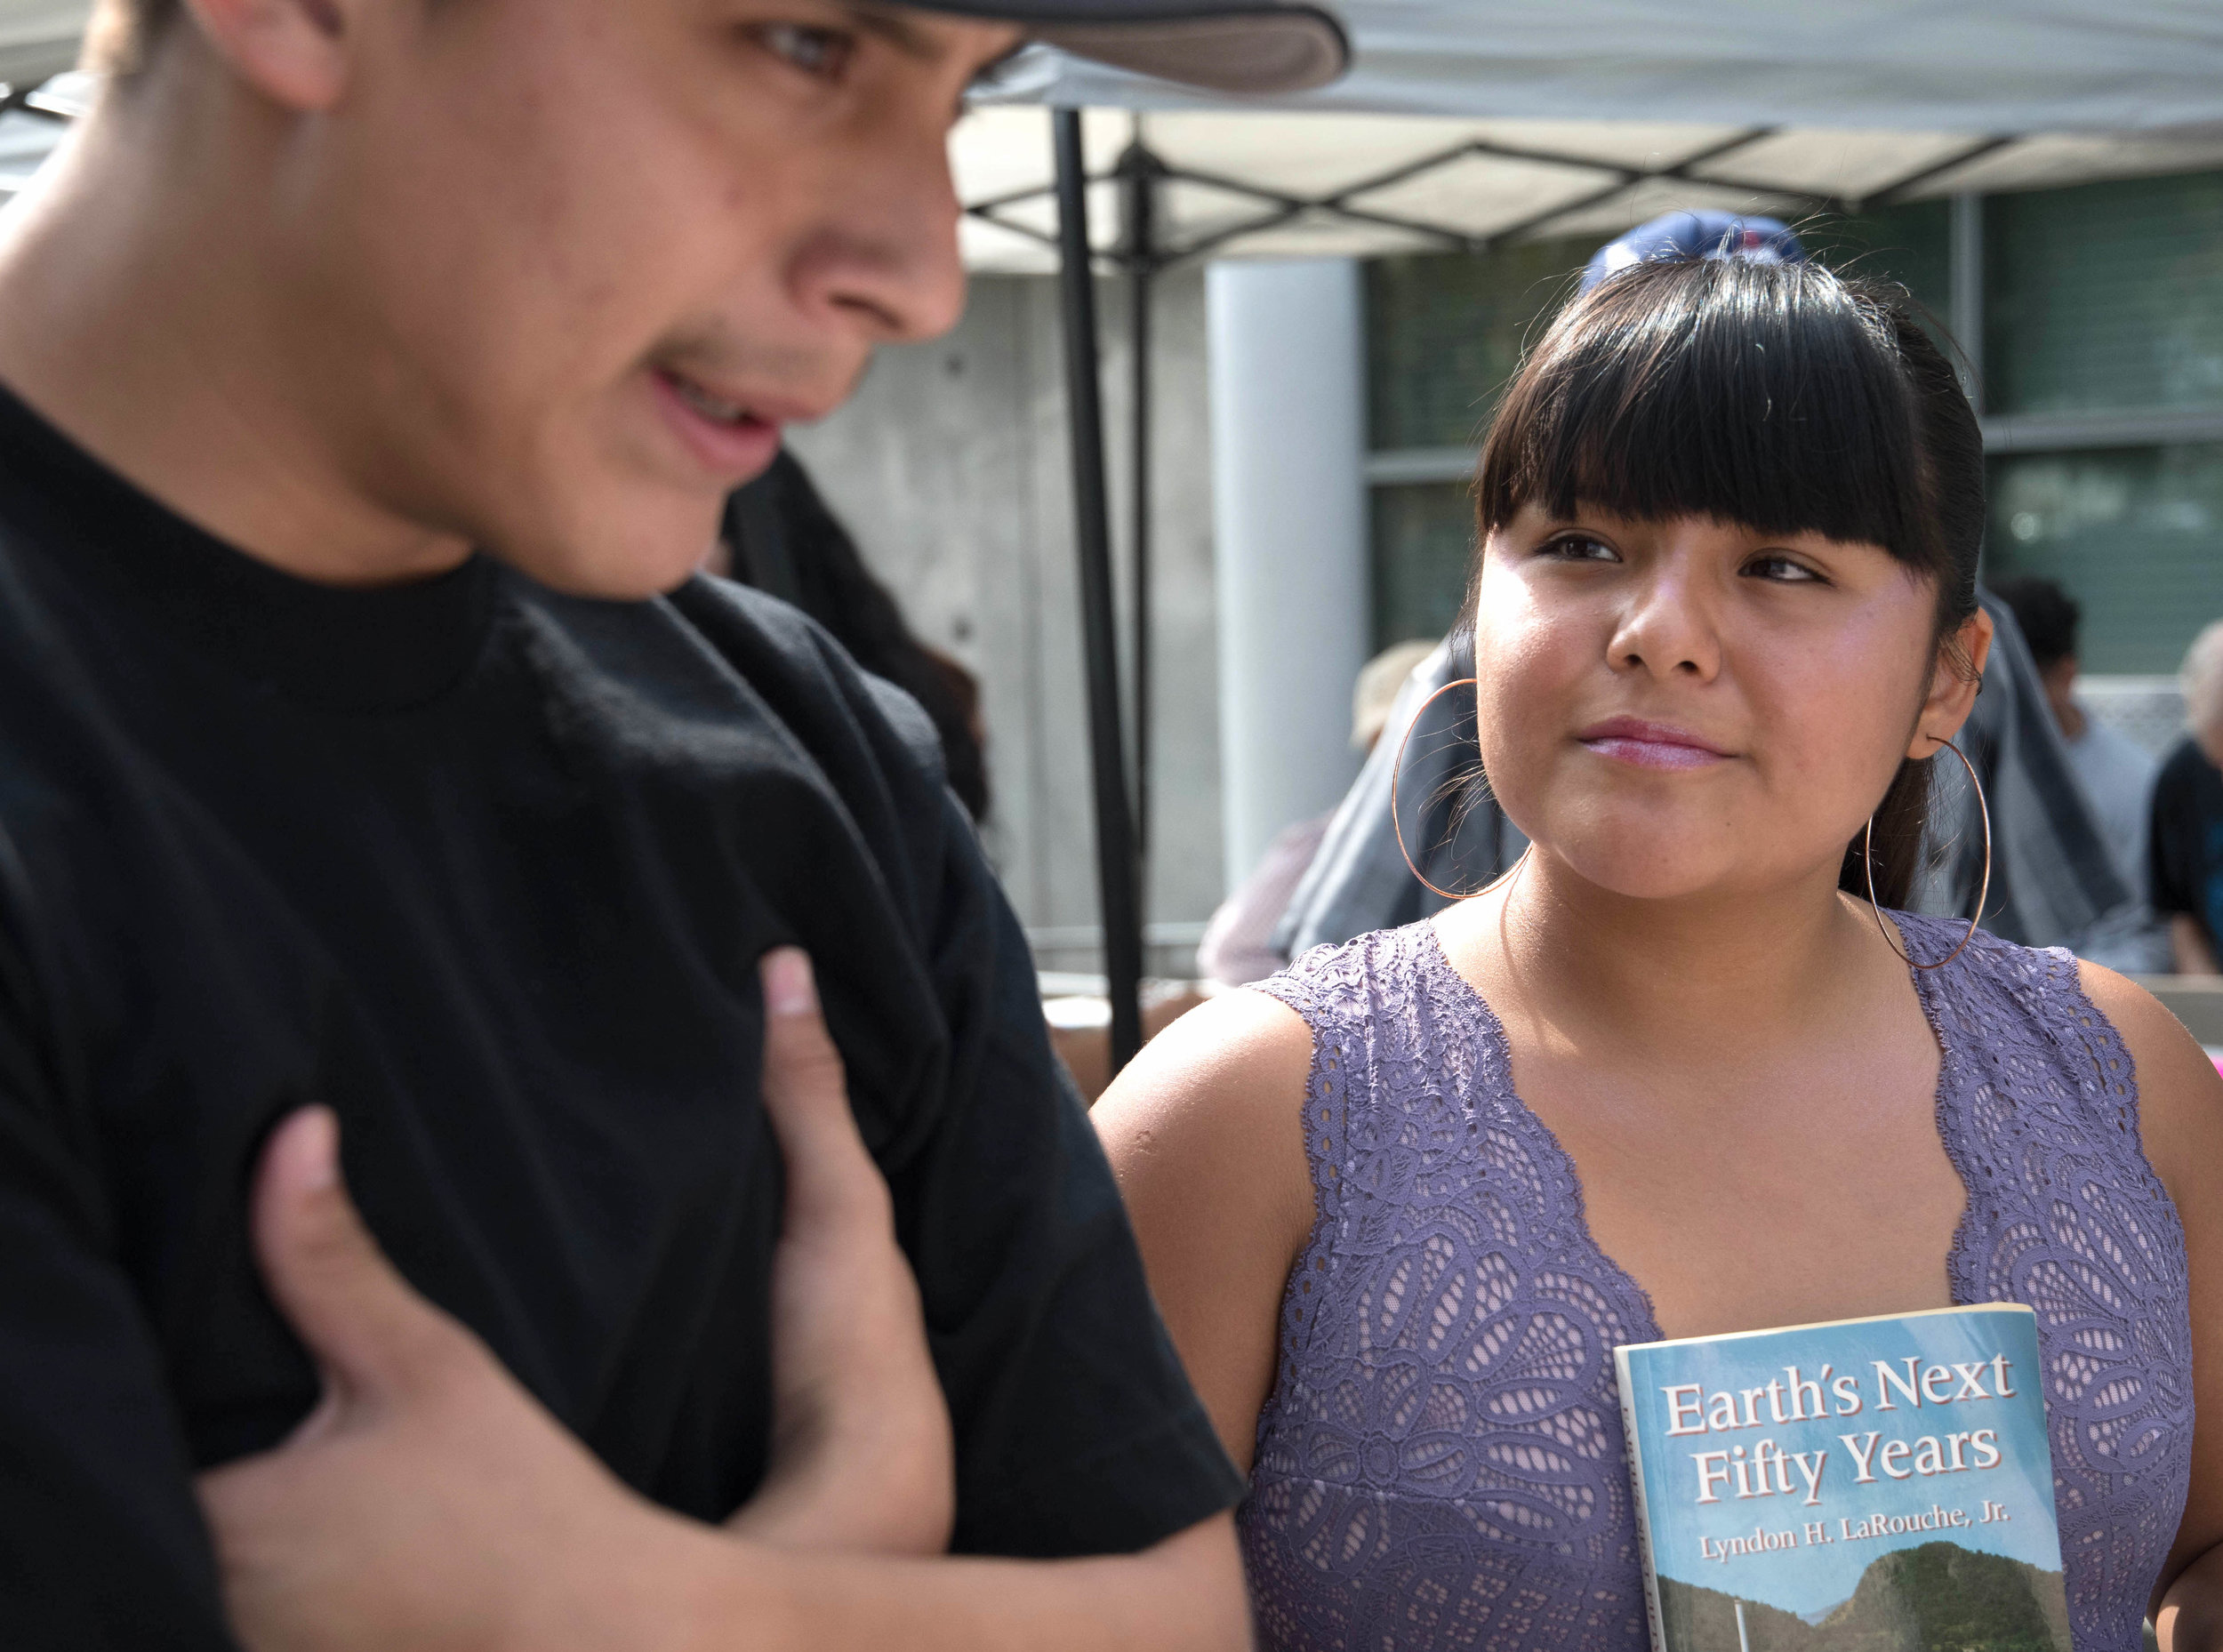  Vice president of Homeboys/Homegirls club, Salma Morales, (right) and club member, Benito Hernandes, at the book drive for youth in juvenile hall at Santa Monica College in Santa Monica, Calif. on October 19th, 2017. Photo by Willow Sando-McCall 